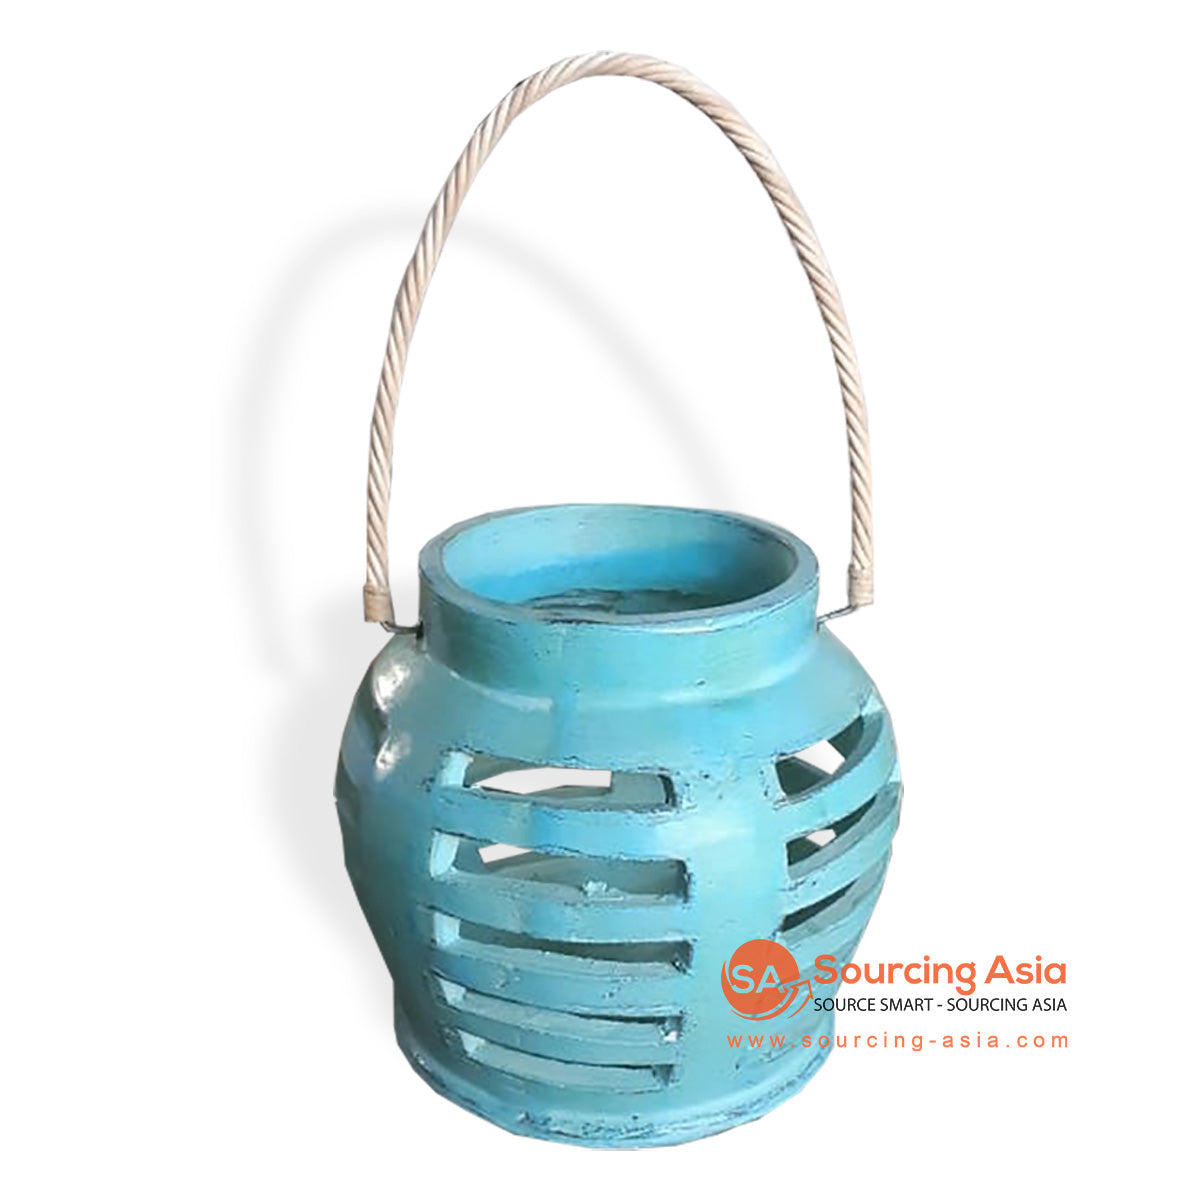 JNP238-KY01 TURQUOISE KY01 TERRACOTTA HANGING CANDLE HOLDER